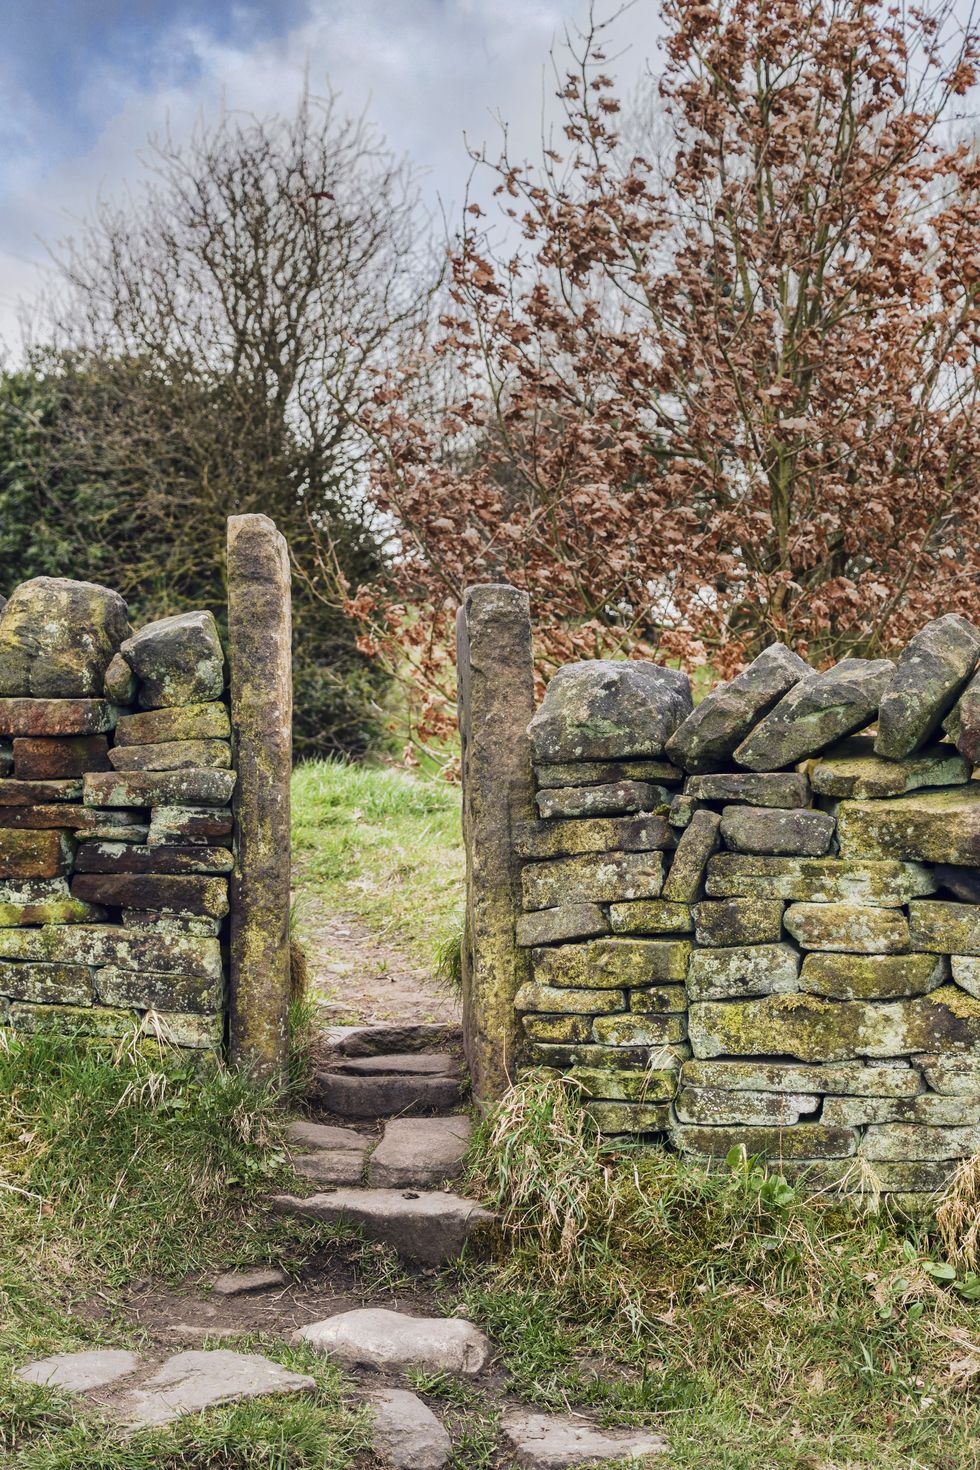 a stile in a drystone wall on a public footpath in the english countryside